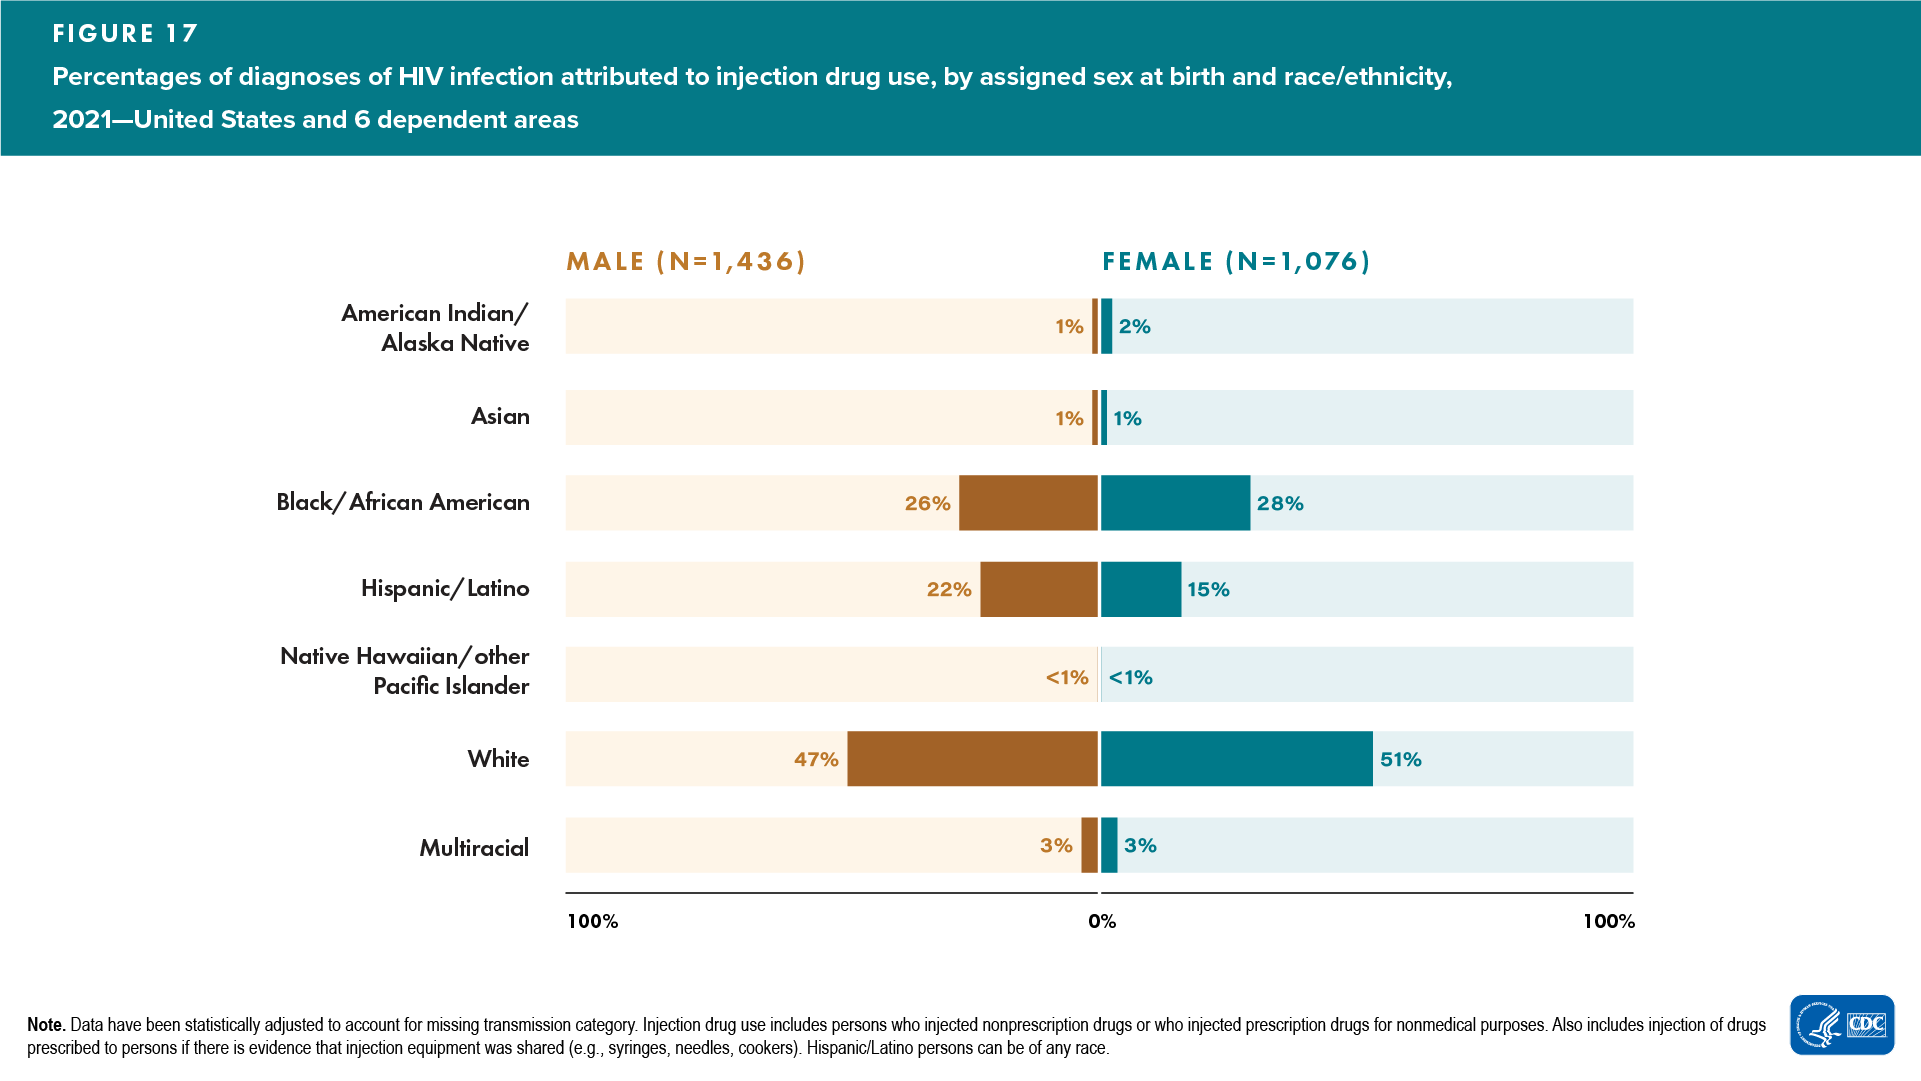 In 2021, among diagnoses of HIV infection attributed to injection drug use, White males and females had the highest percentage of diagnoses by race, 47% and 51%, respectively.